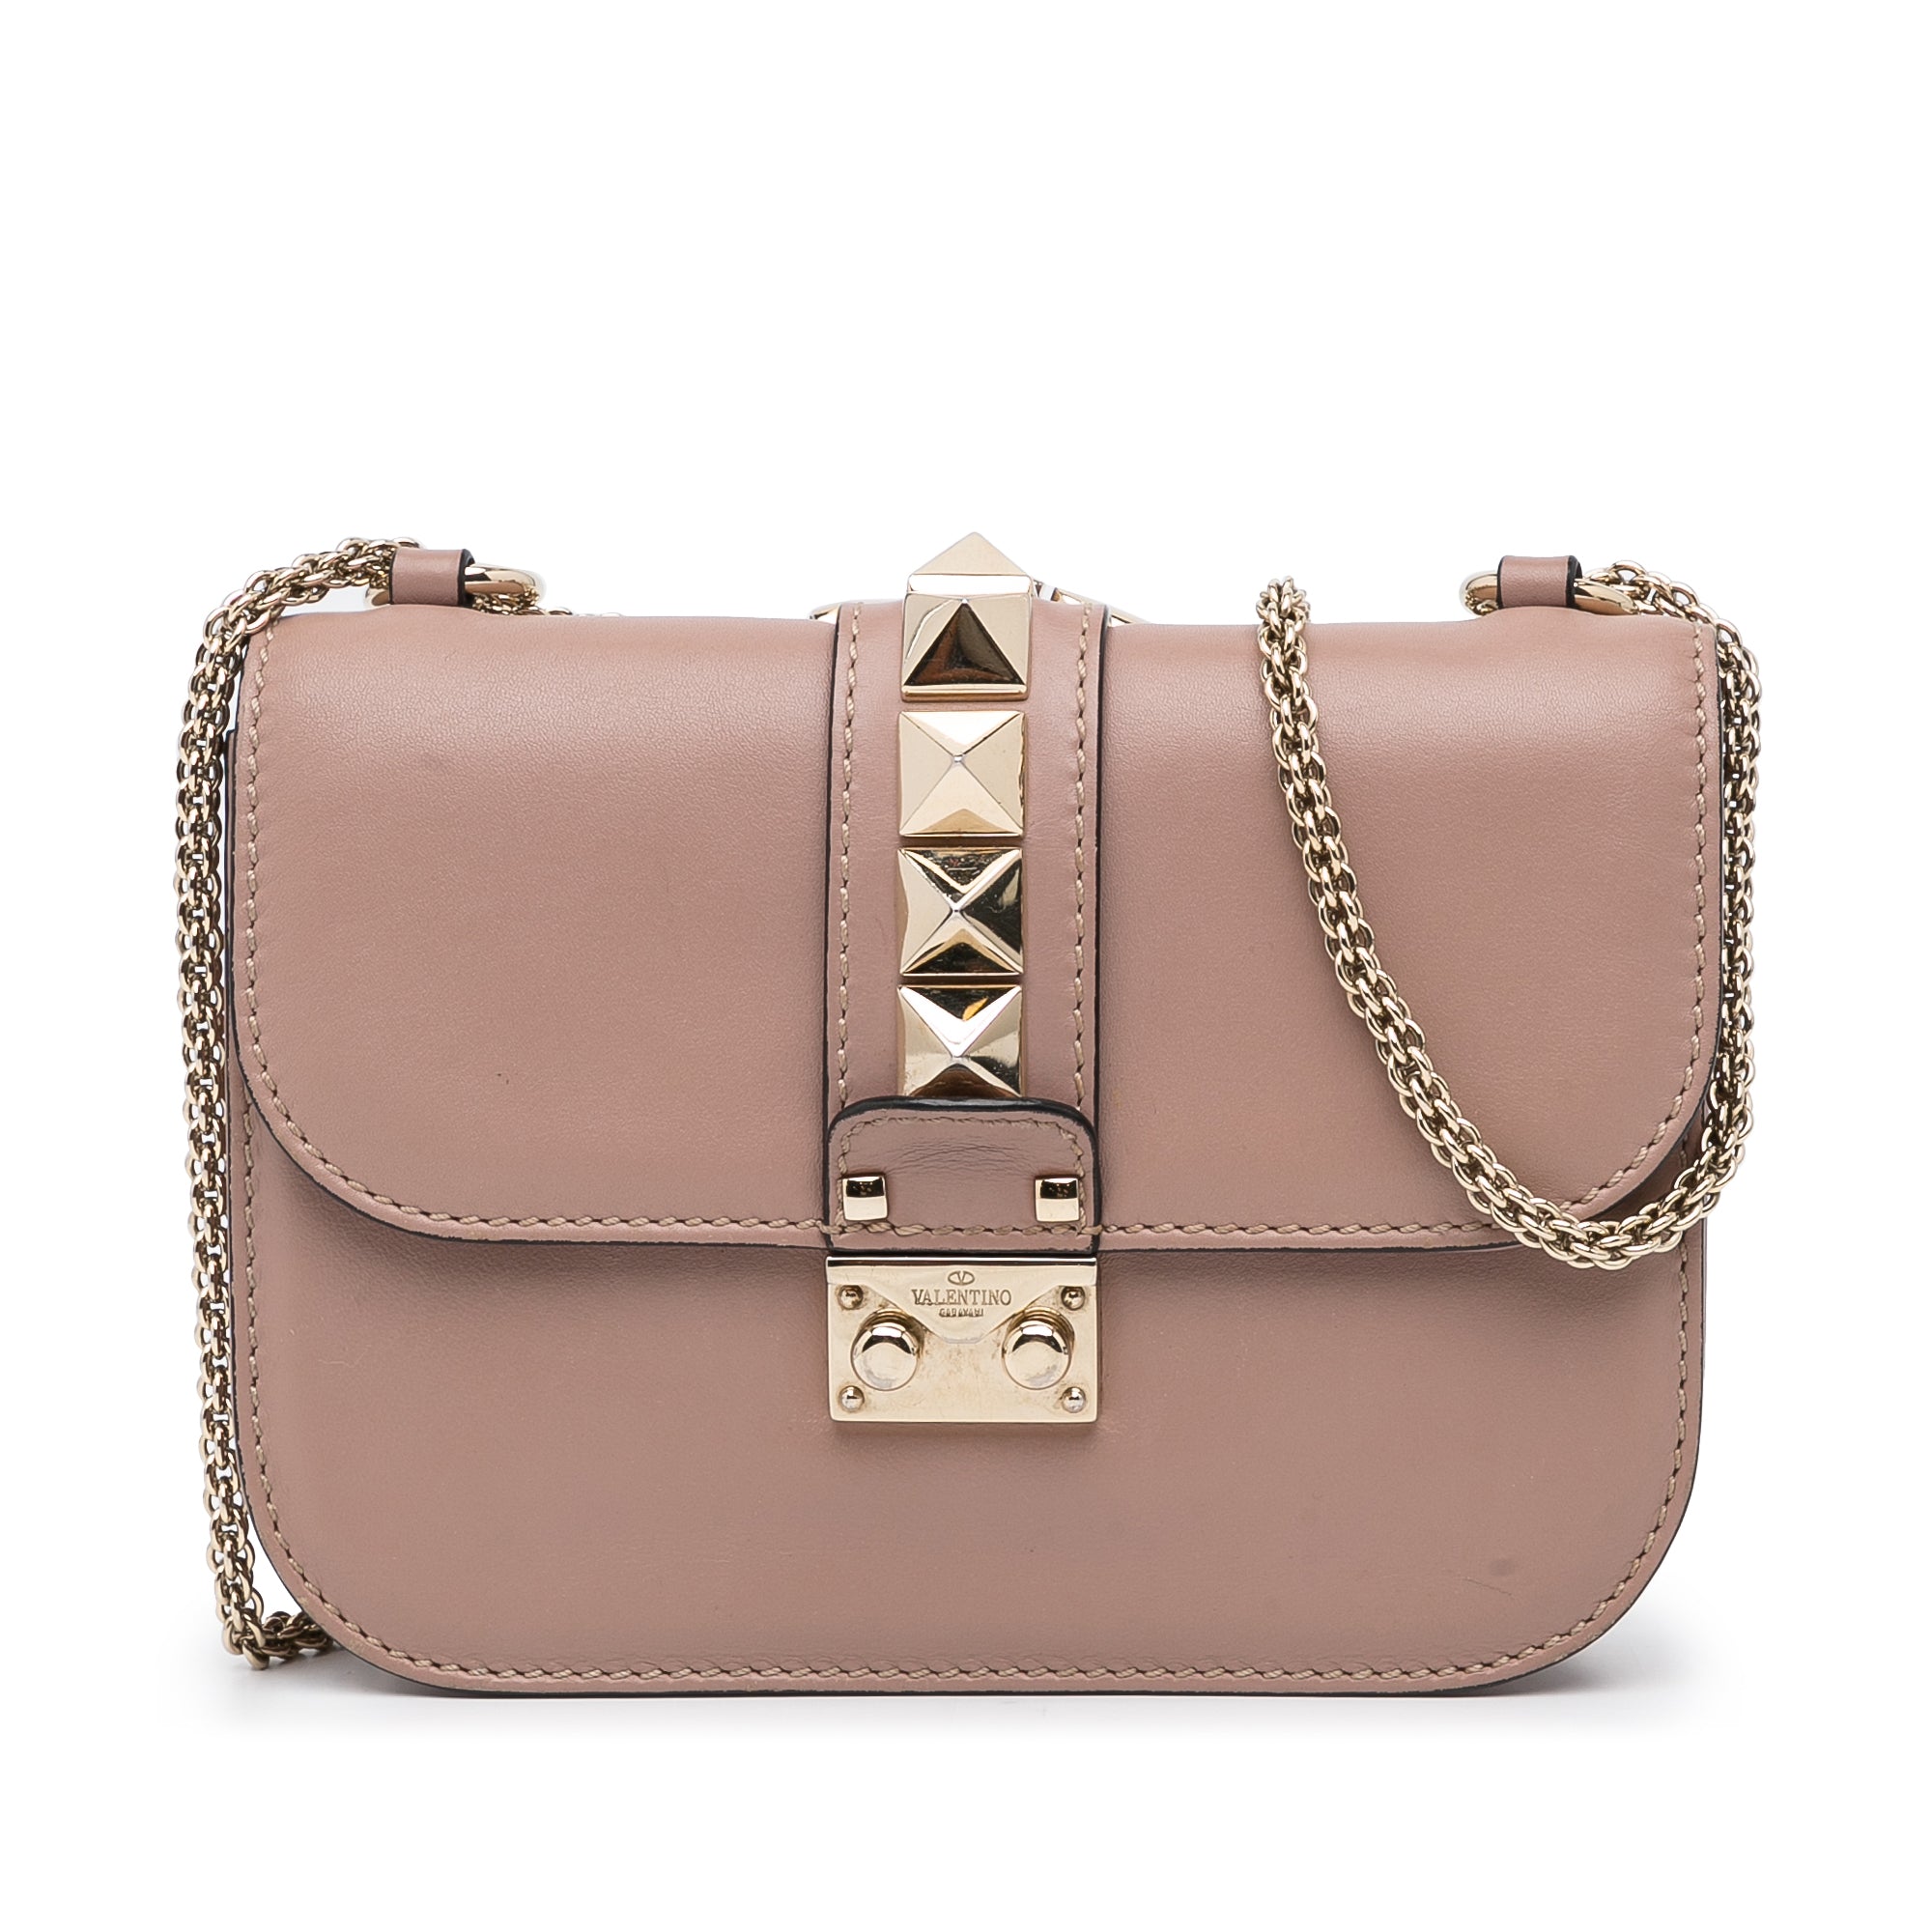 Valentino Pink Leather Glam Lock Small Flap Bag